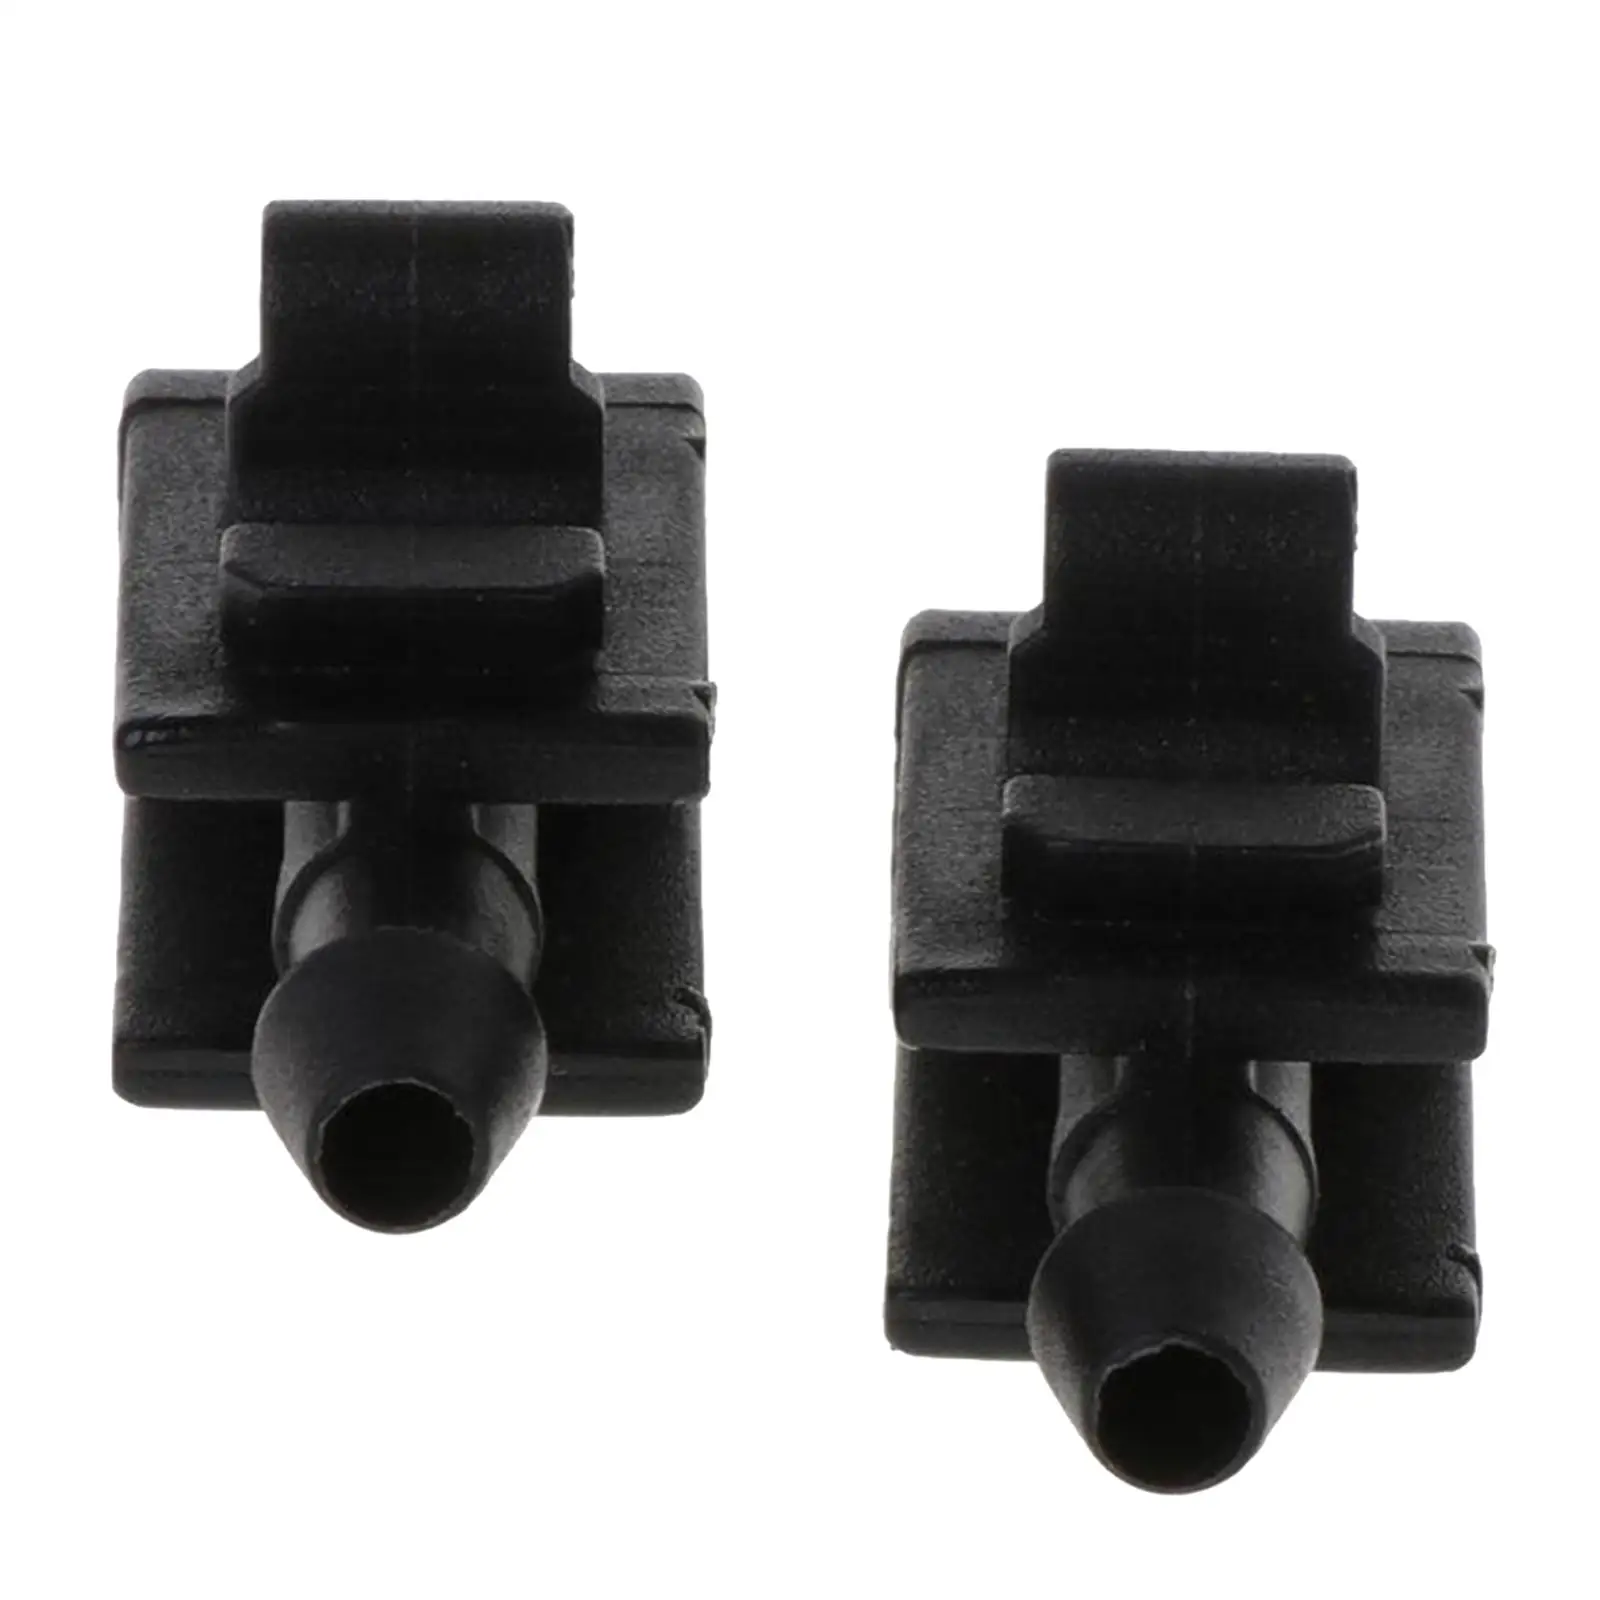 1 Pair Auto Windshield Washer Spray Nozzles Jet for II Scenic II